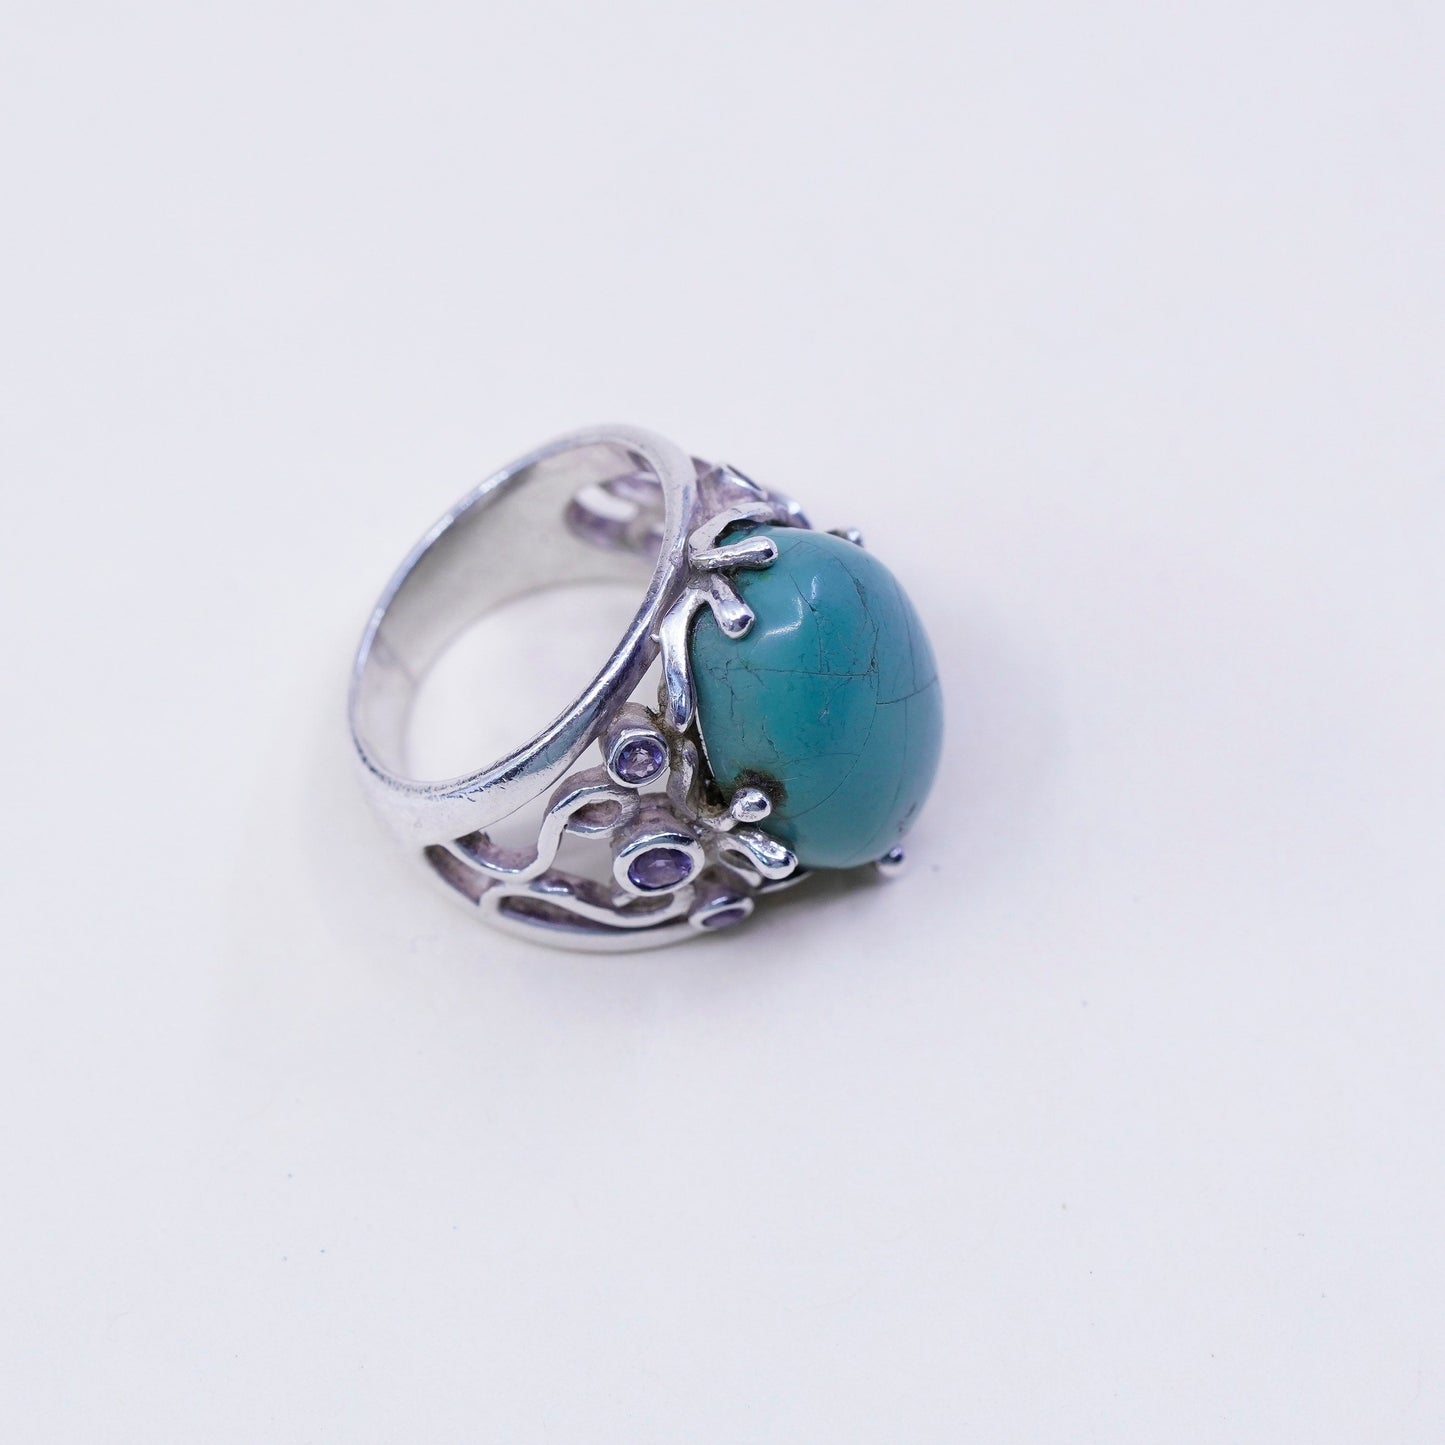 Size 7.25, Vintage sterling 925 silver filigree ring w/ turquoise and amethyst